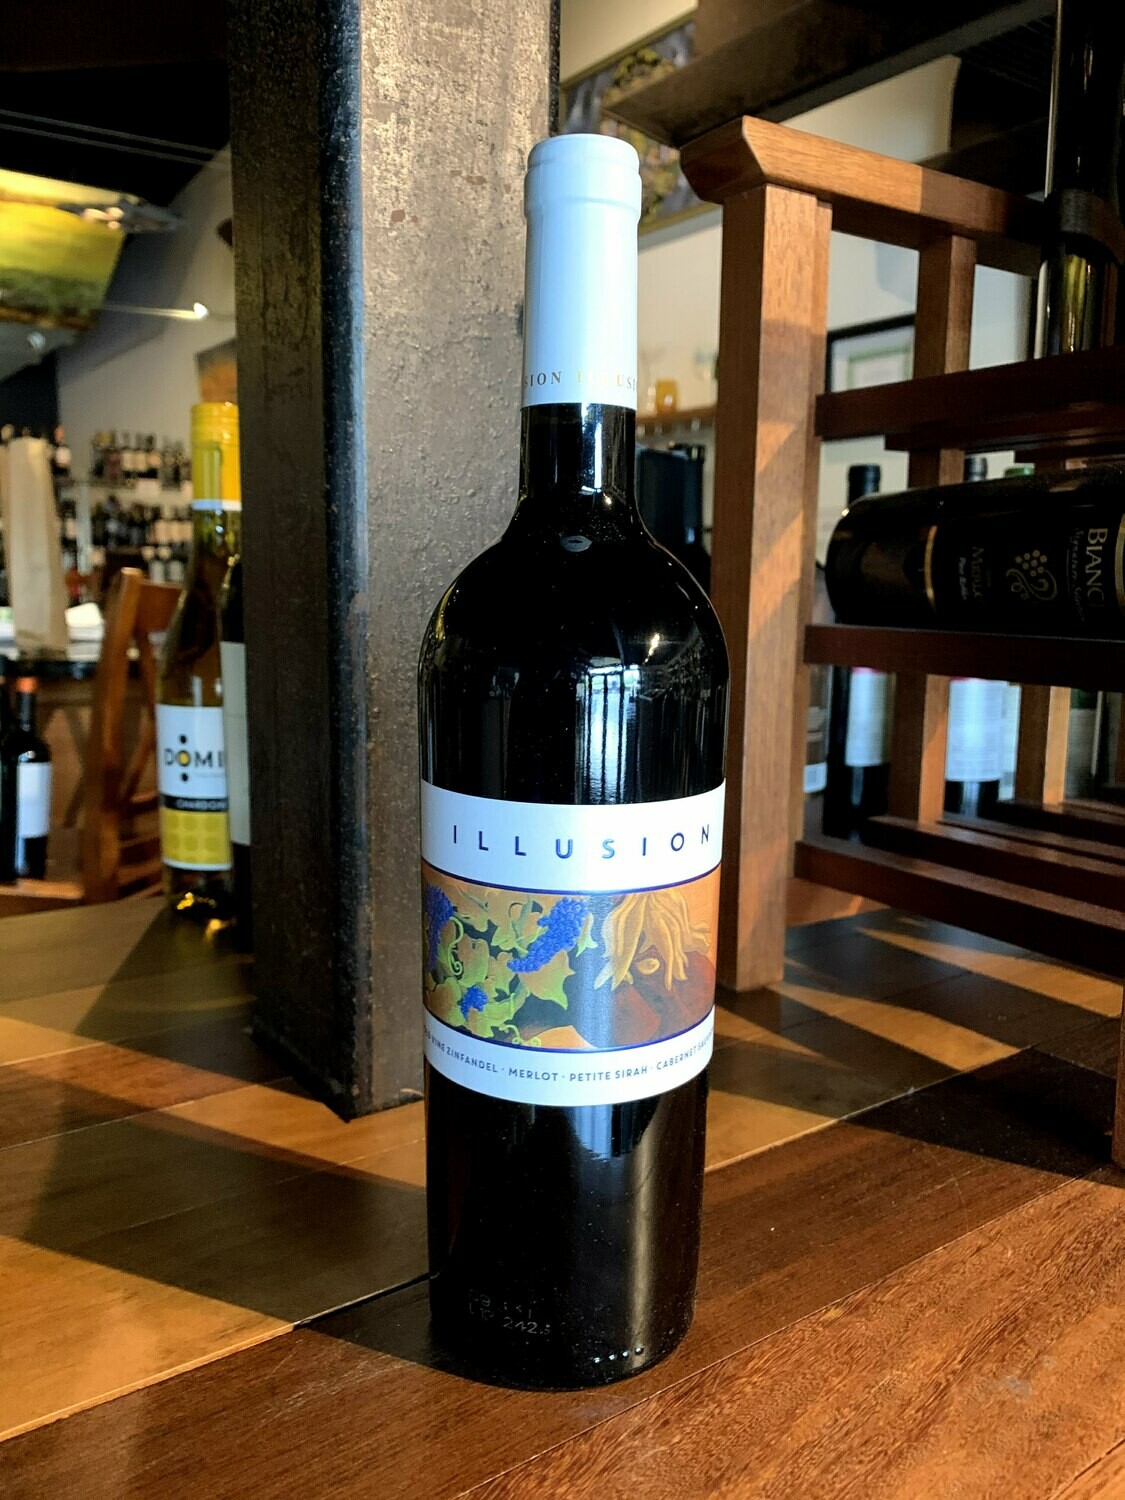 Pieriano Illusion Red Blend